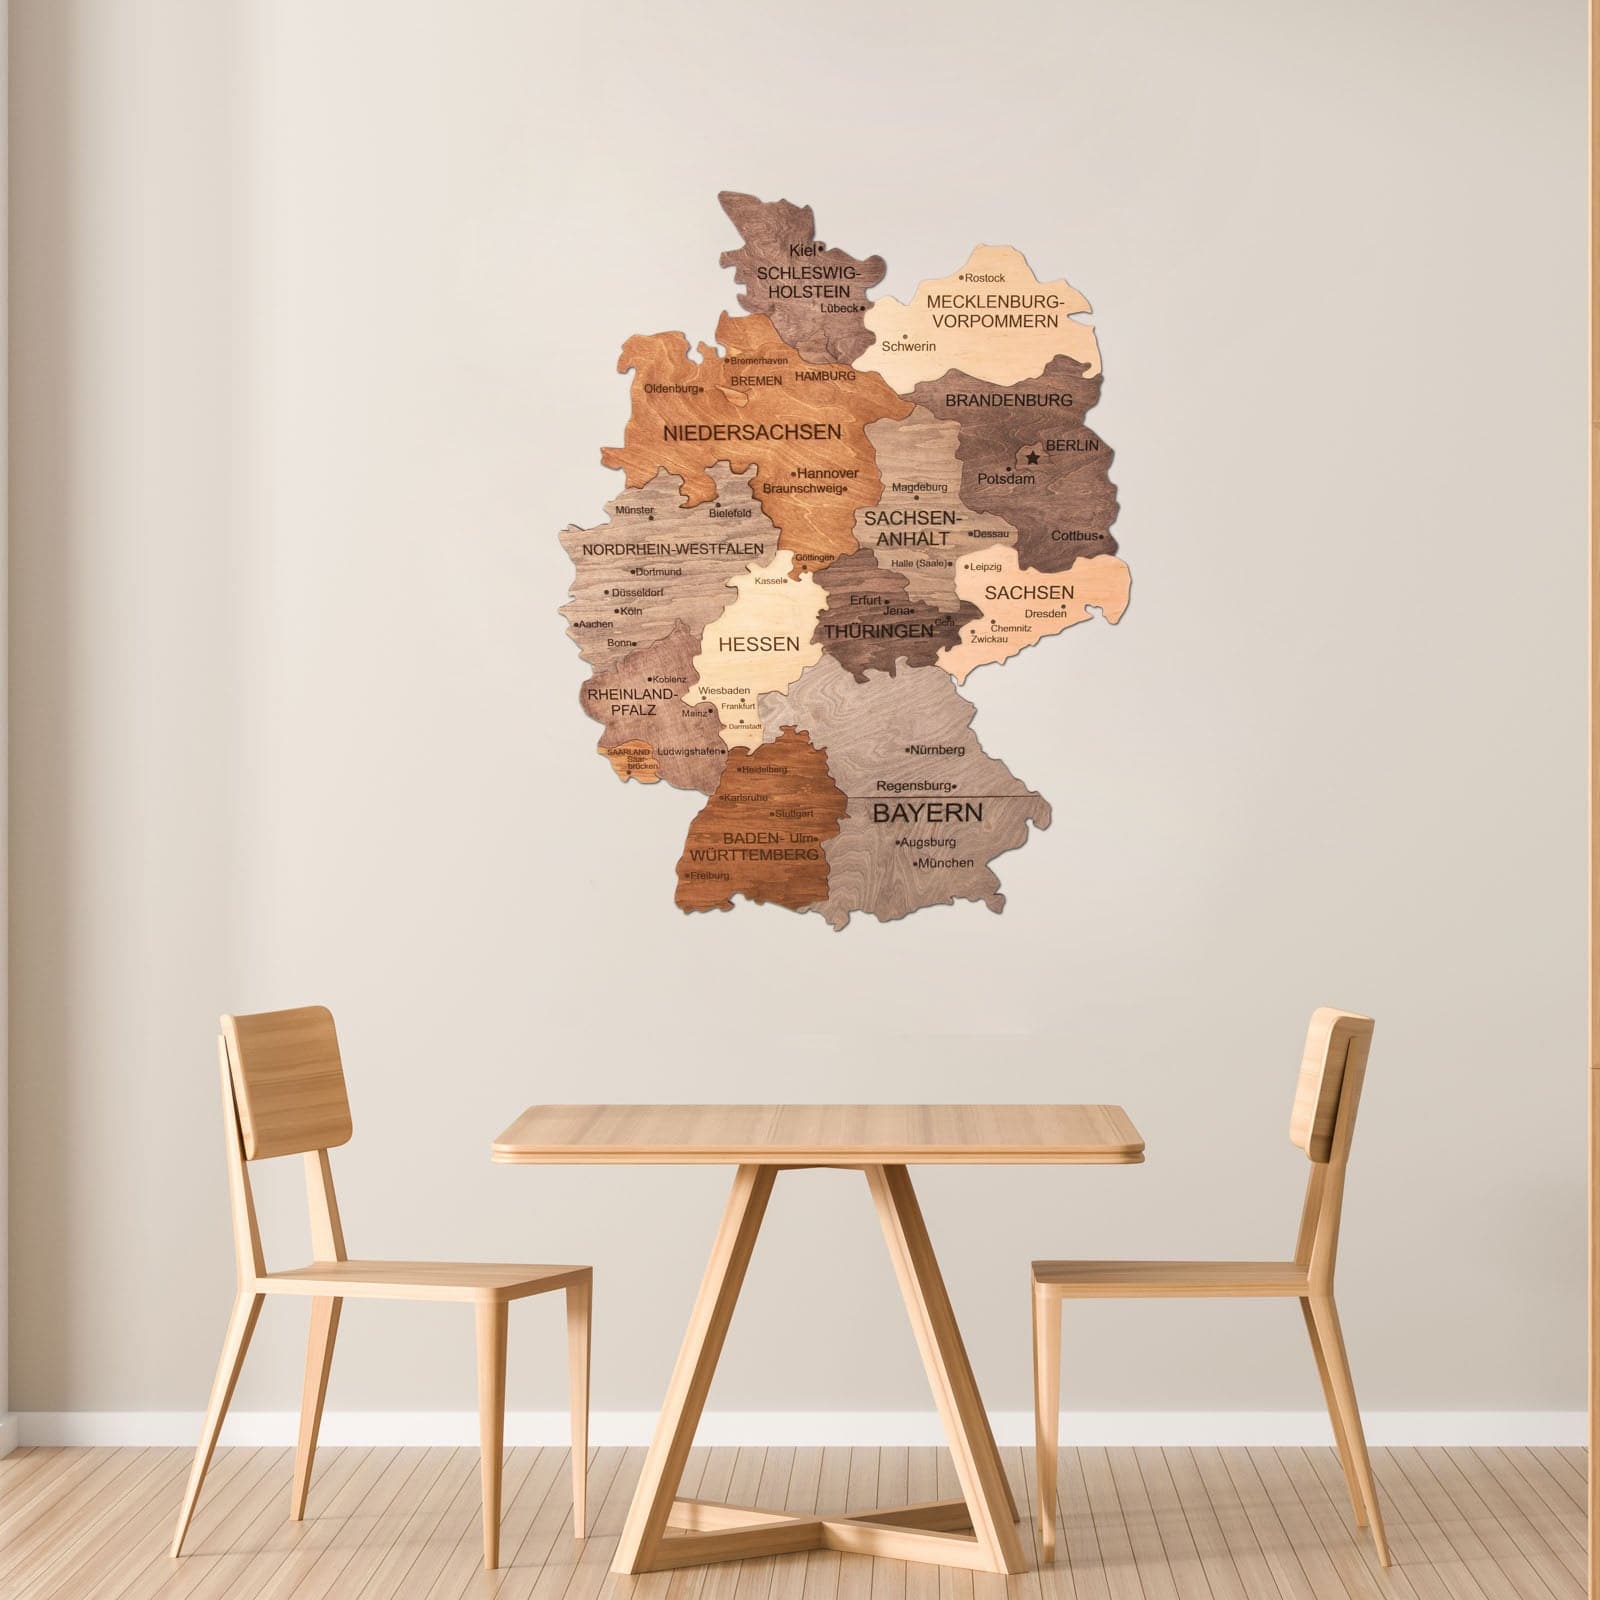 3D Wooden World Map Multicolor from Enjoy The Wood ‣ Good Price, Reviews